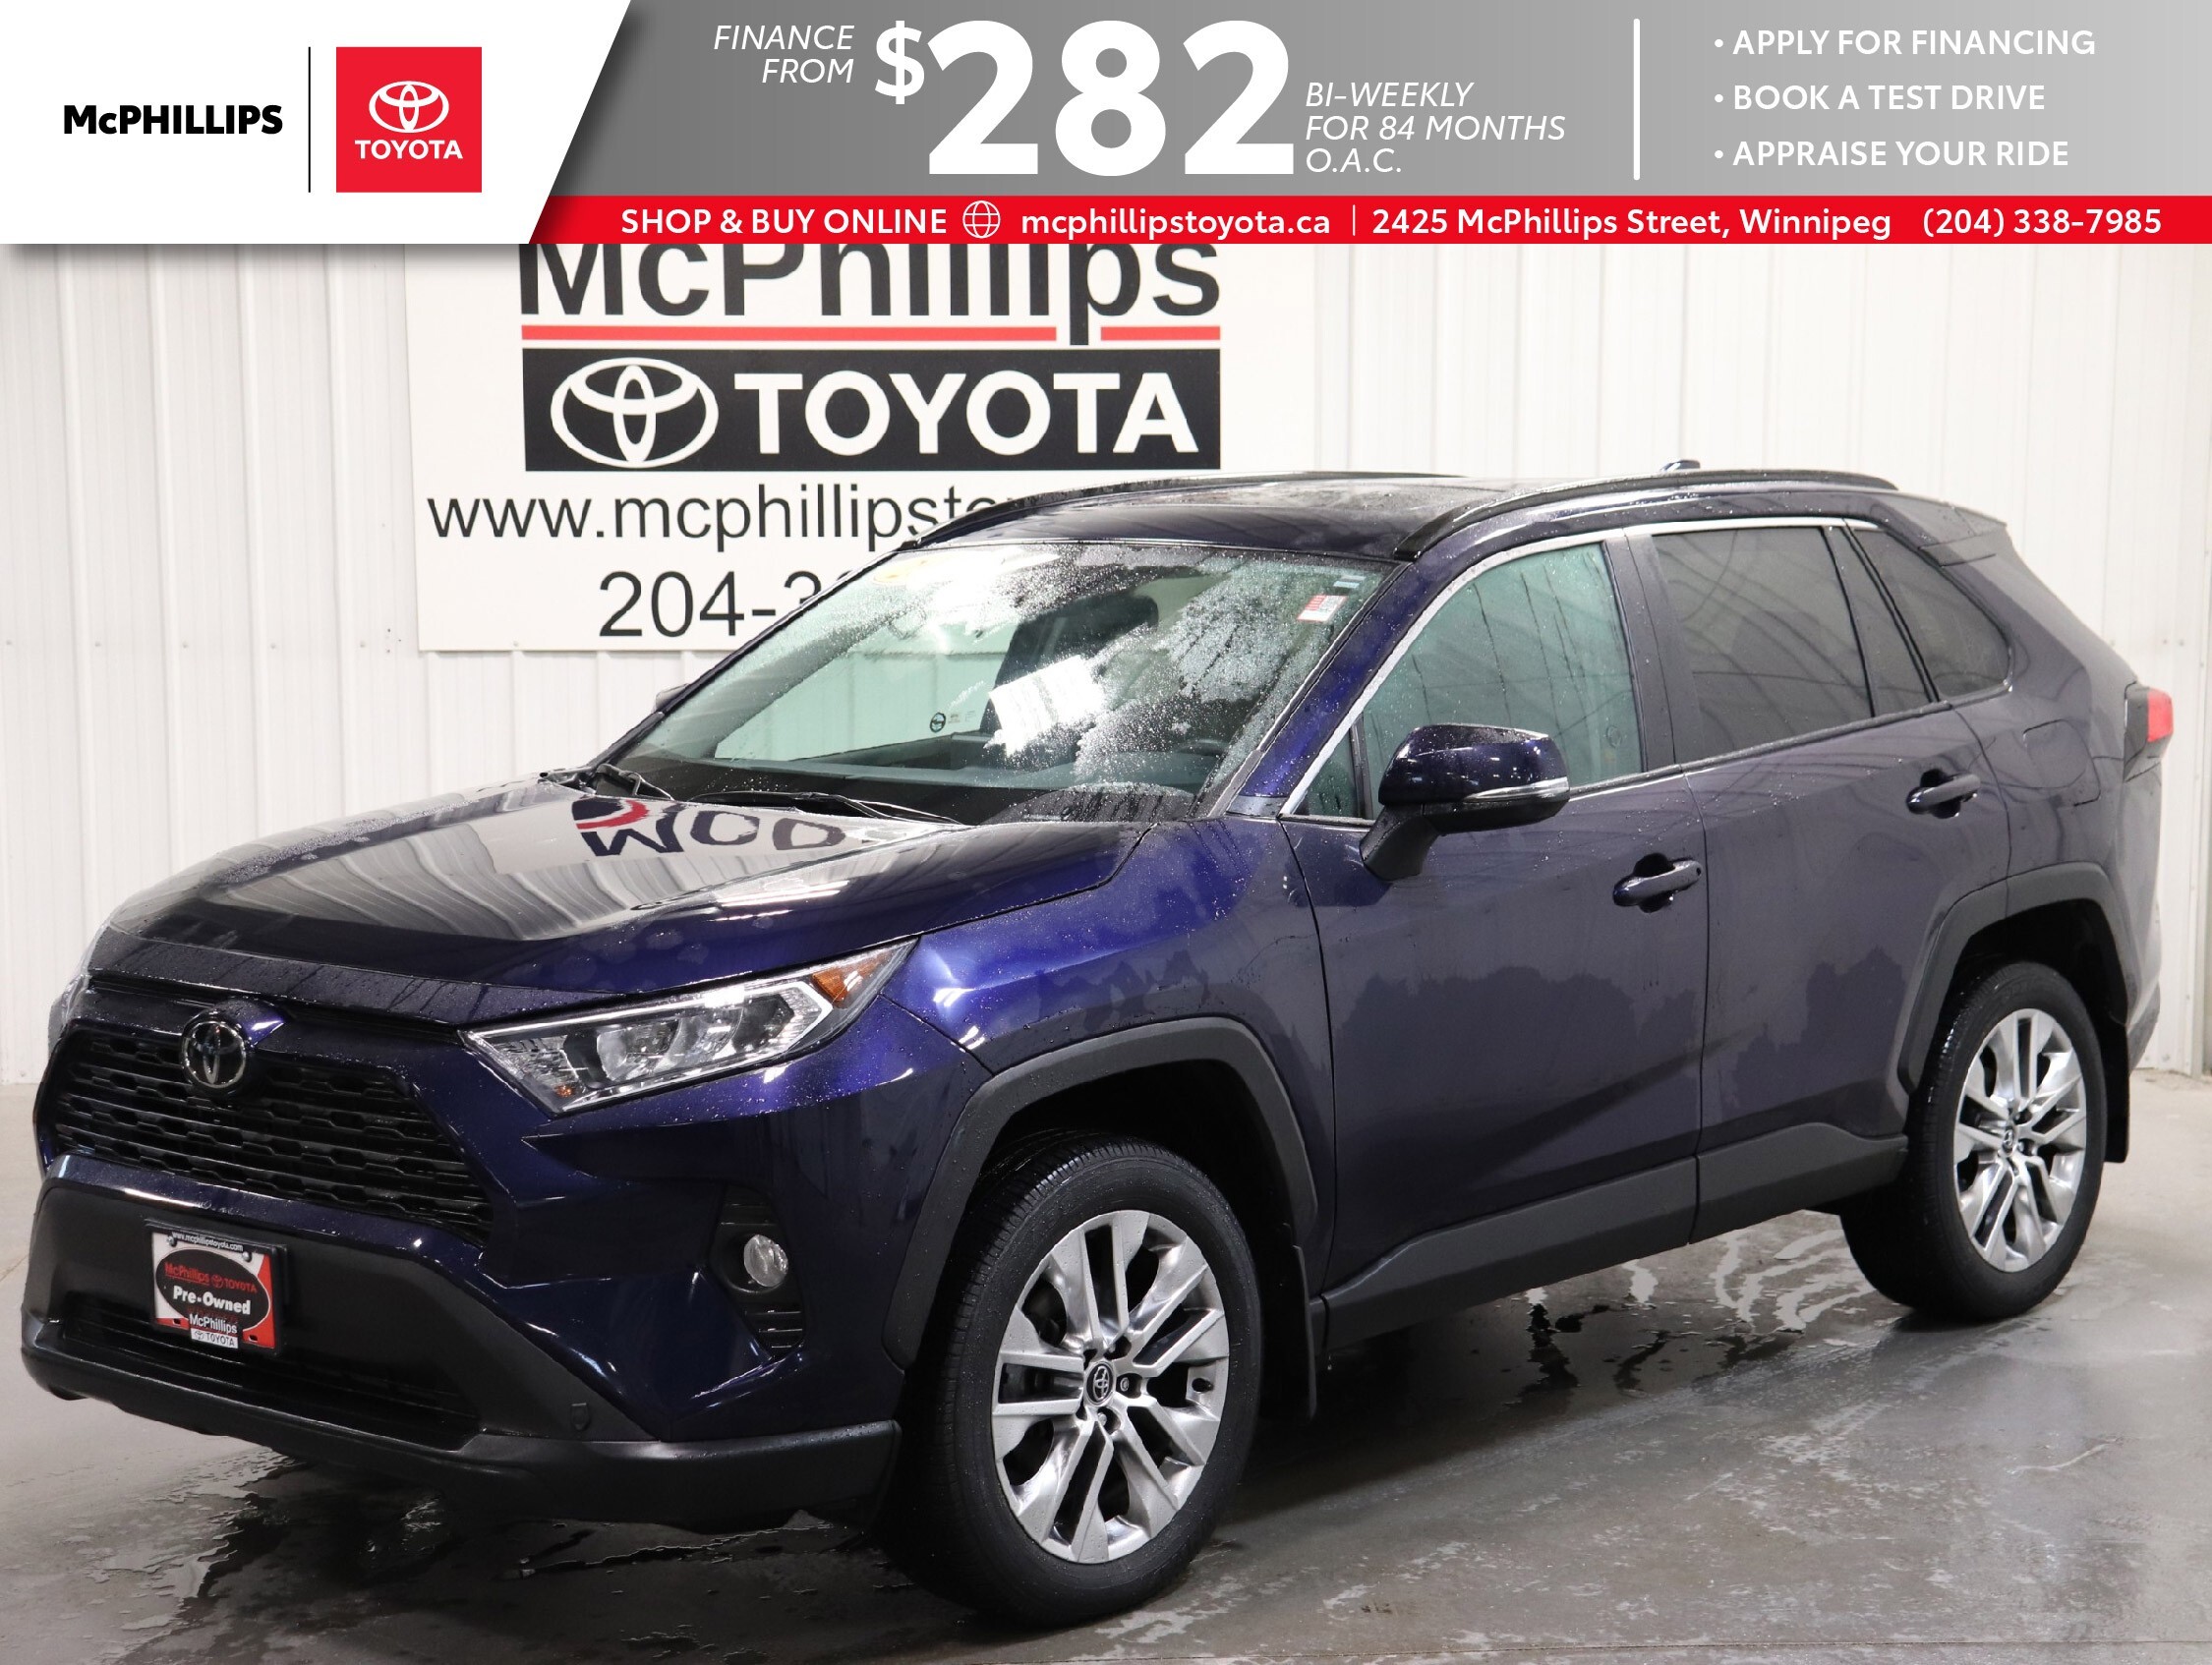 2020 Toyota RAV4 AWD | ONE OWNER | HTD SEATS | PWR SUNROOF